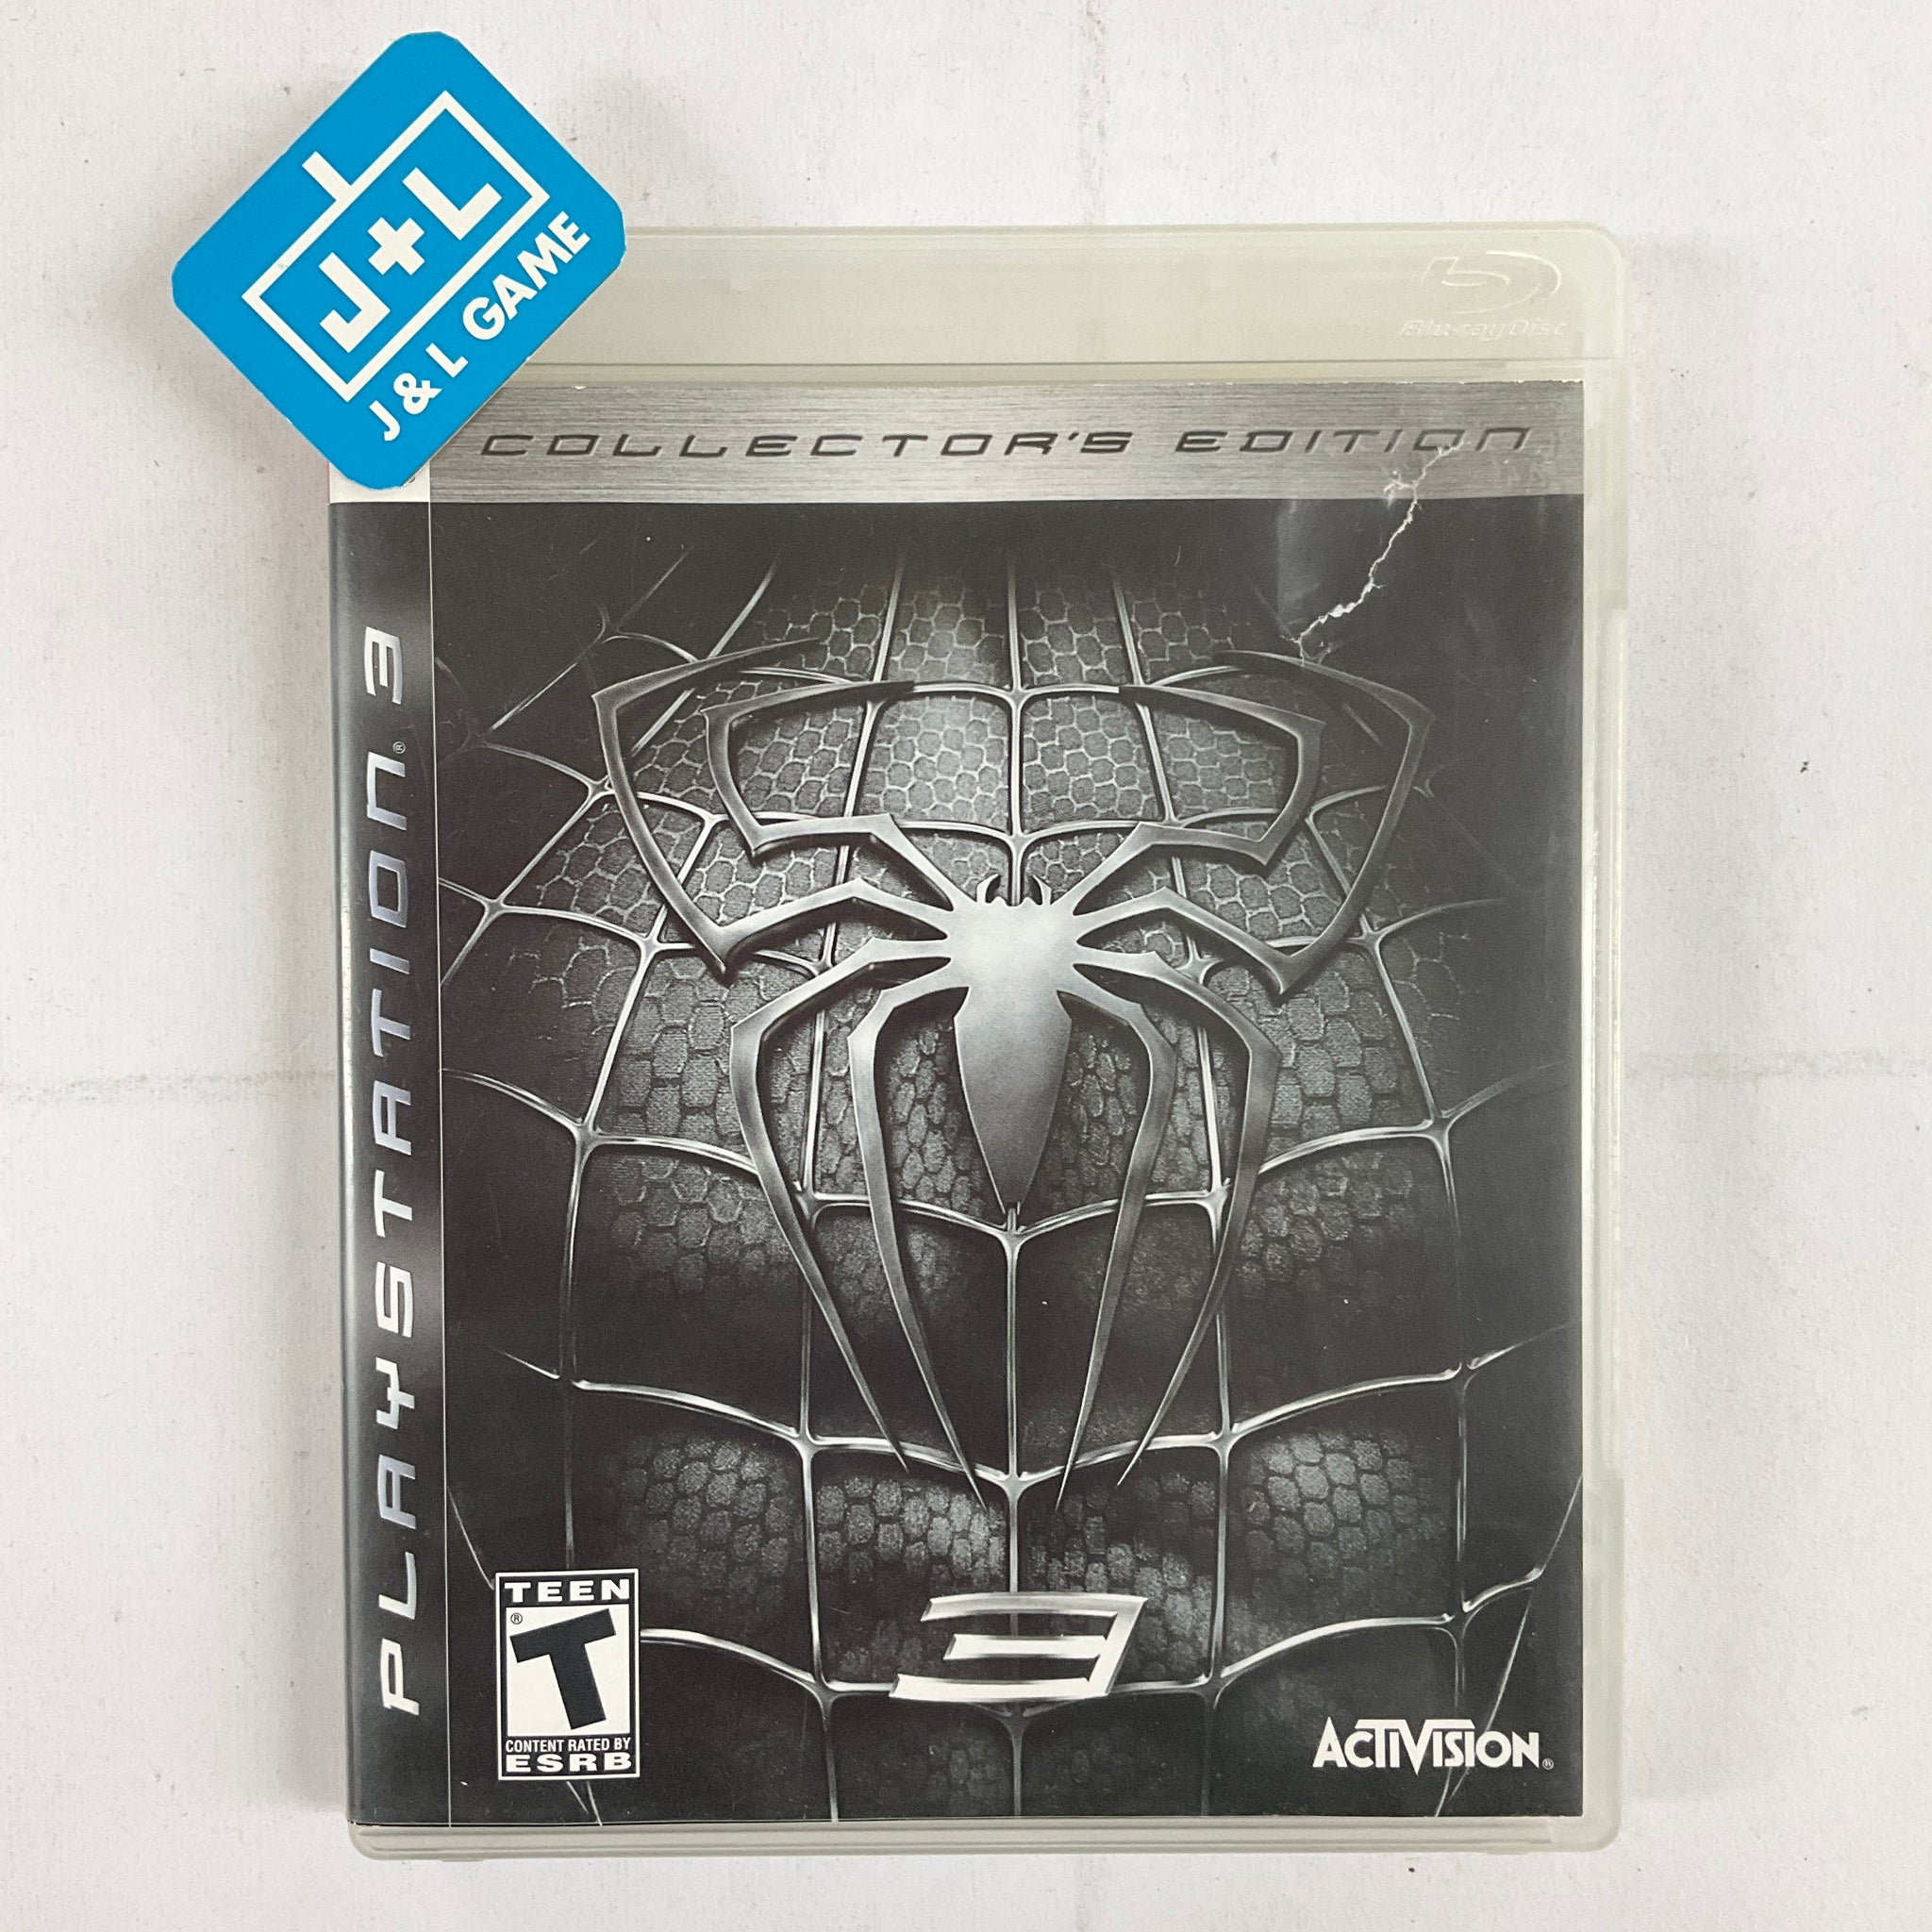 The Amazing Spider-Man - (PS3) PlayStation 3 [Pre-Owned] – J&L